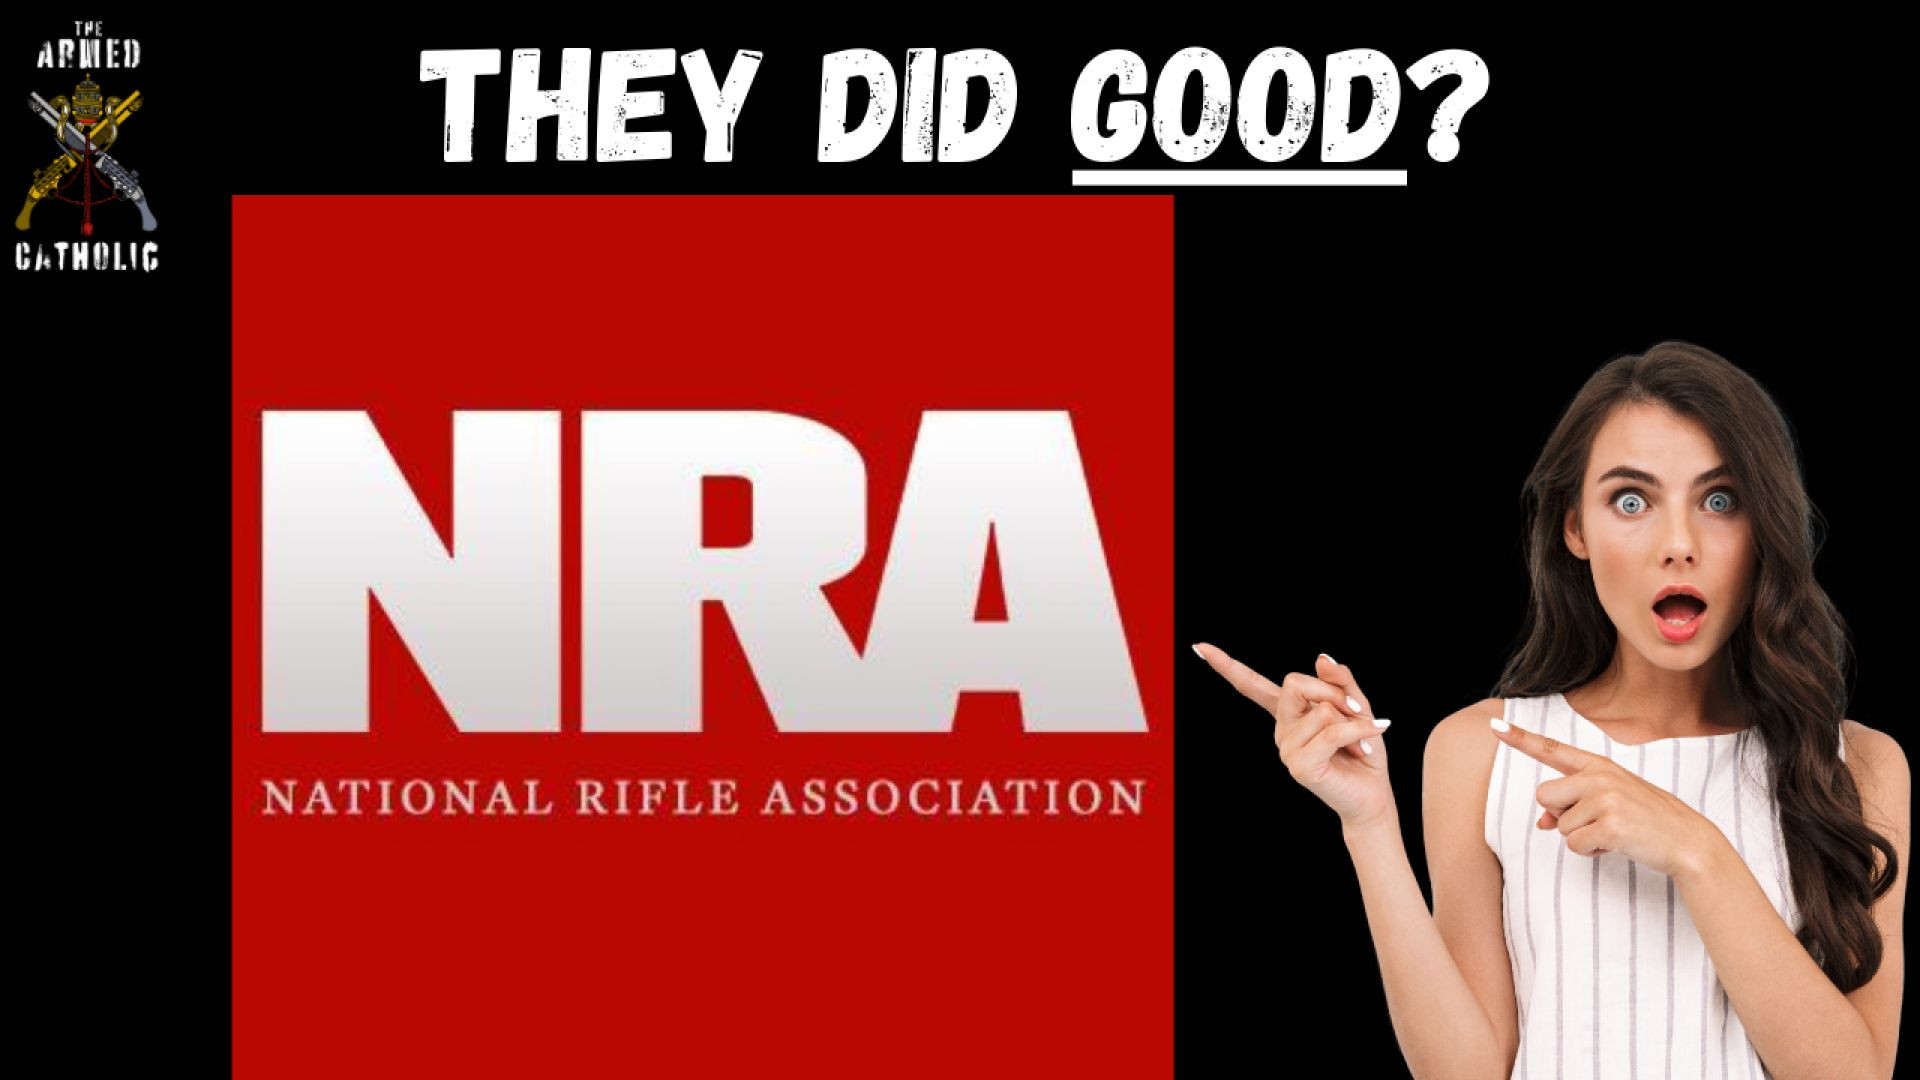 NRA Takes on Governor's 'Unlawful' Gun Order with Full GOP Support #2anews